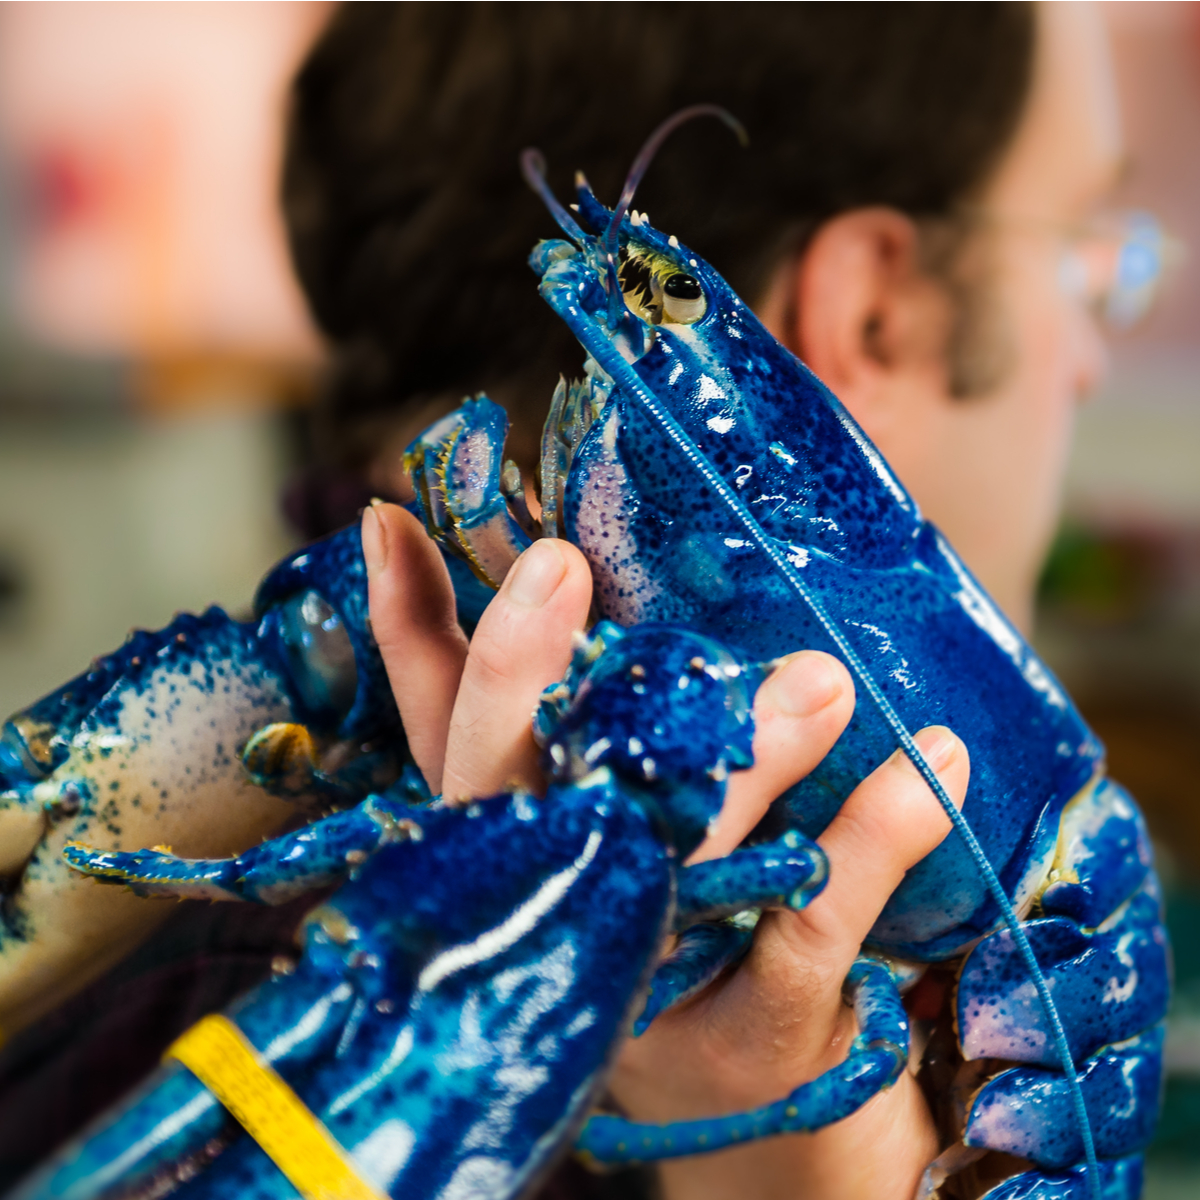 Rare Blue Lobster Caught By Fishermen